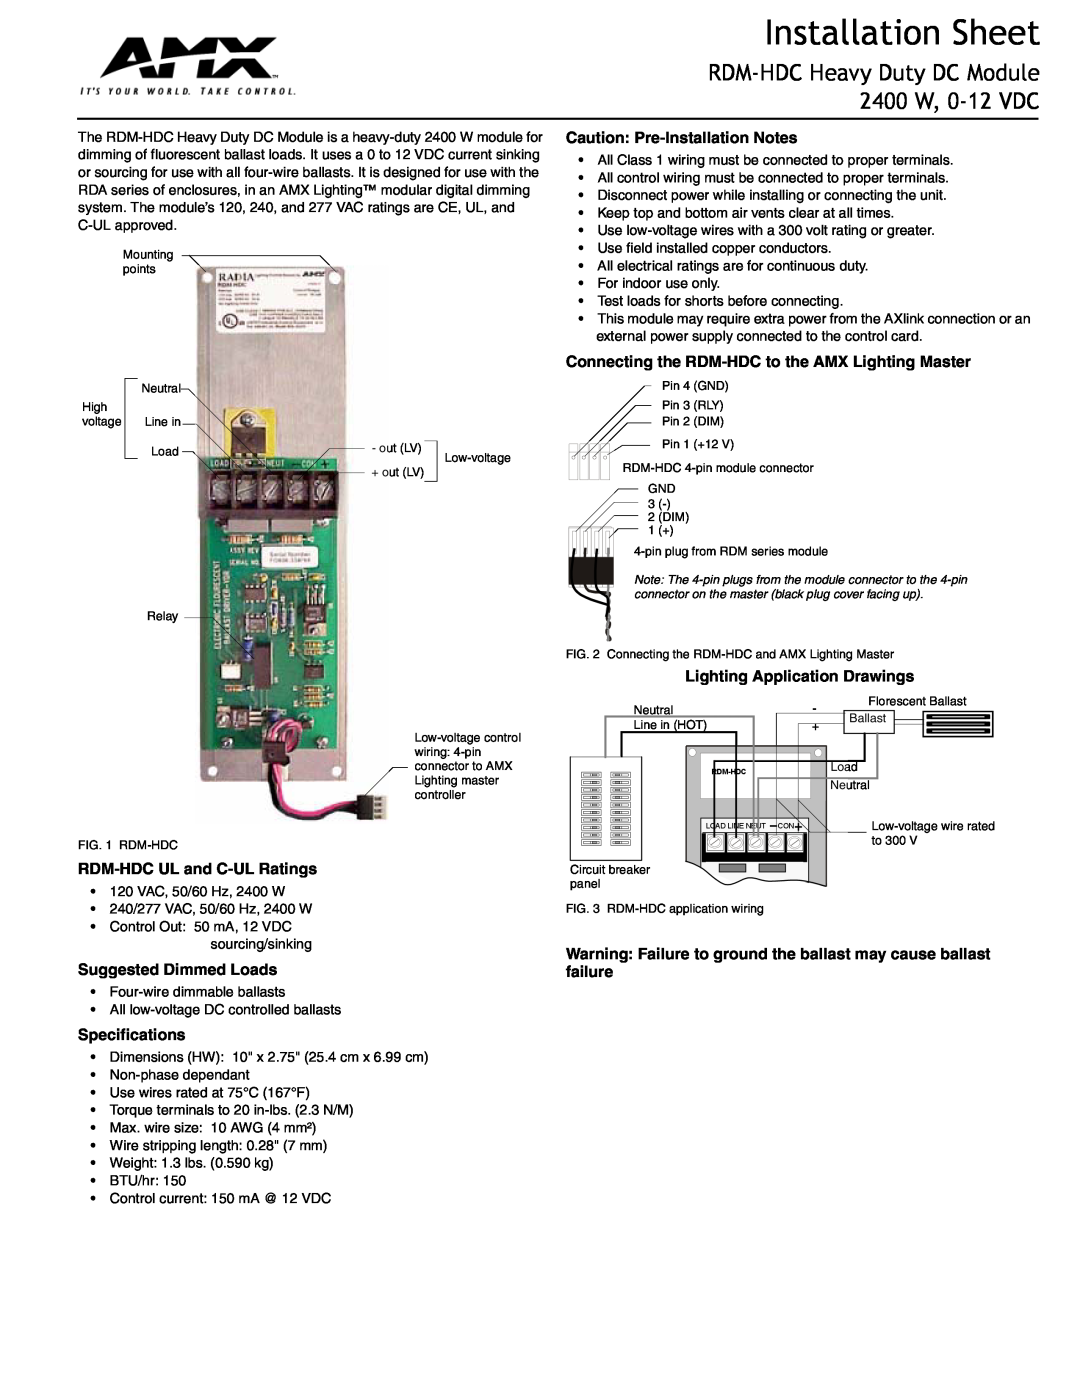 AMX specifications Installation Sheet, RDM-HDC Heavy Duty DC Module 2400 W, 0-12 VDC, Caution Pre-Installation Notes 